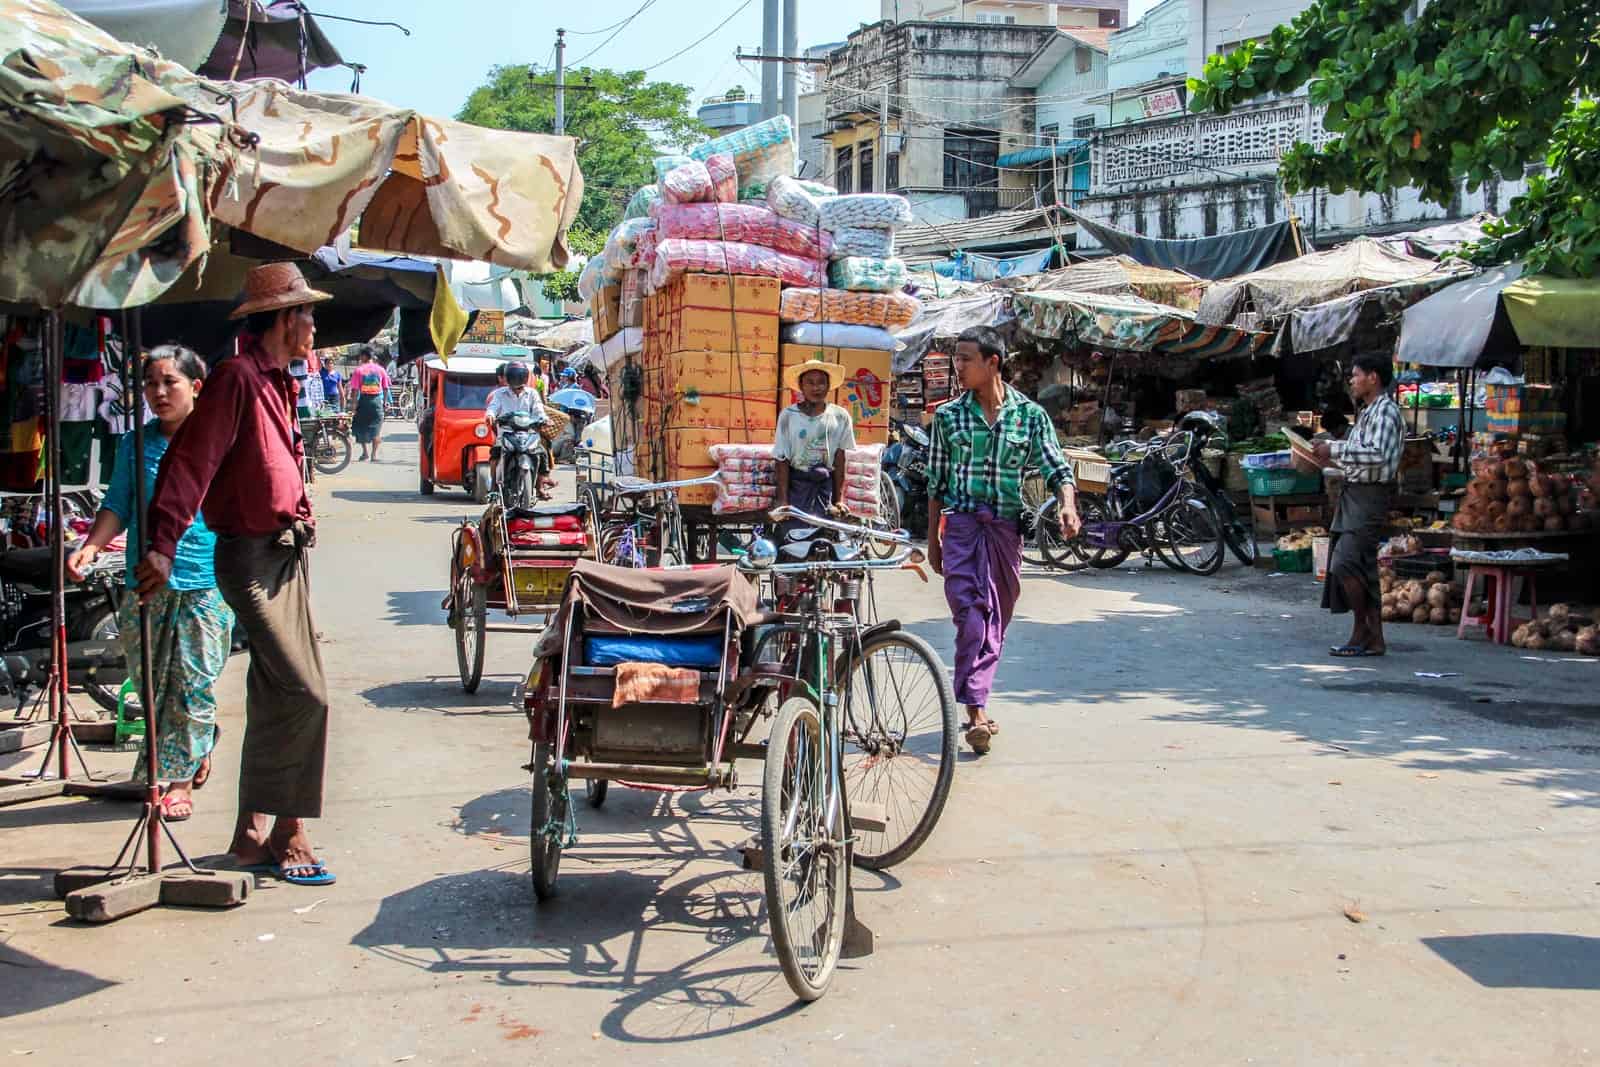 A man in a red shirt, beige hat and green wrap skirt stands next to a market stall while a man in a green shirt and purple tunic and a bike packed high with boxes pass. A bustling street scene in Myanmar.